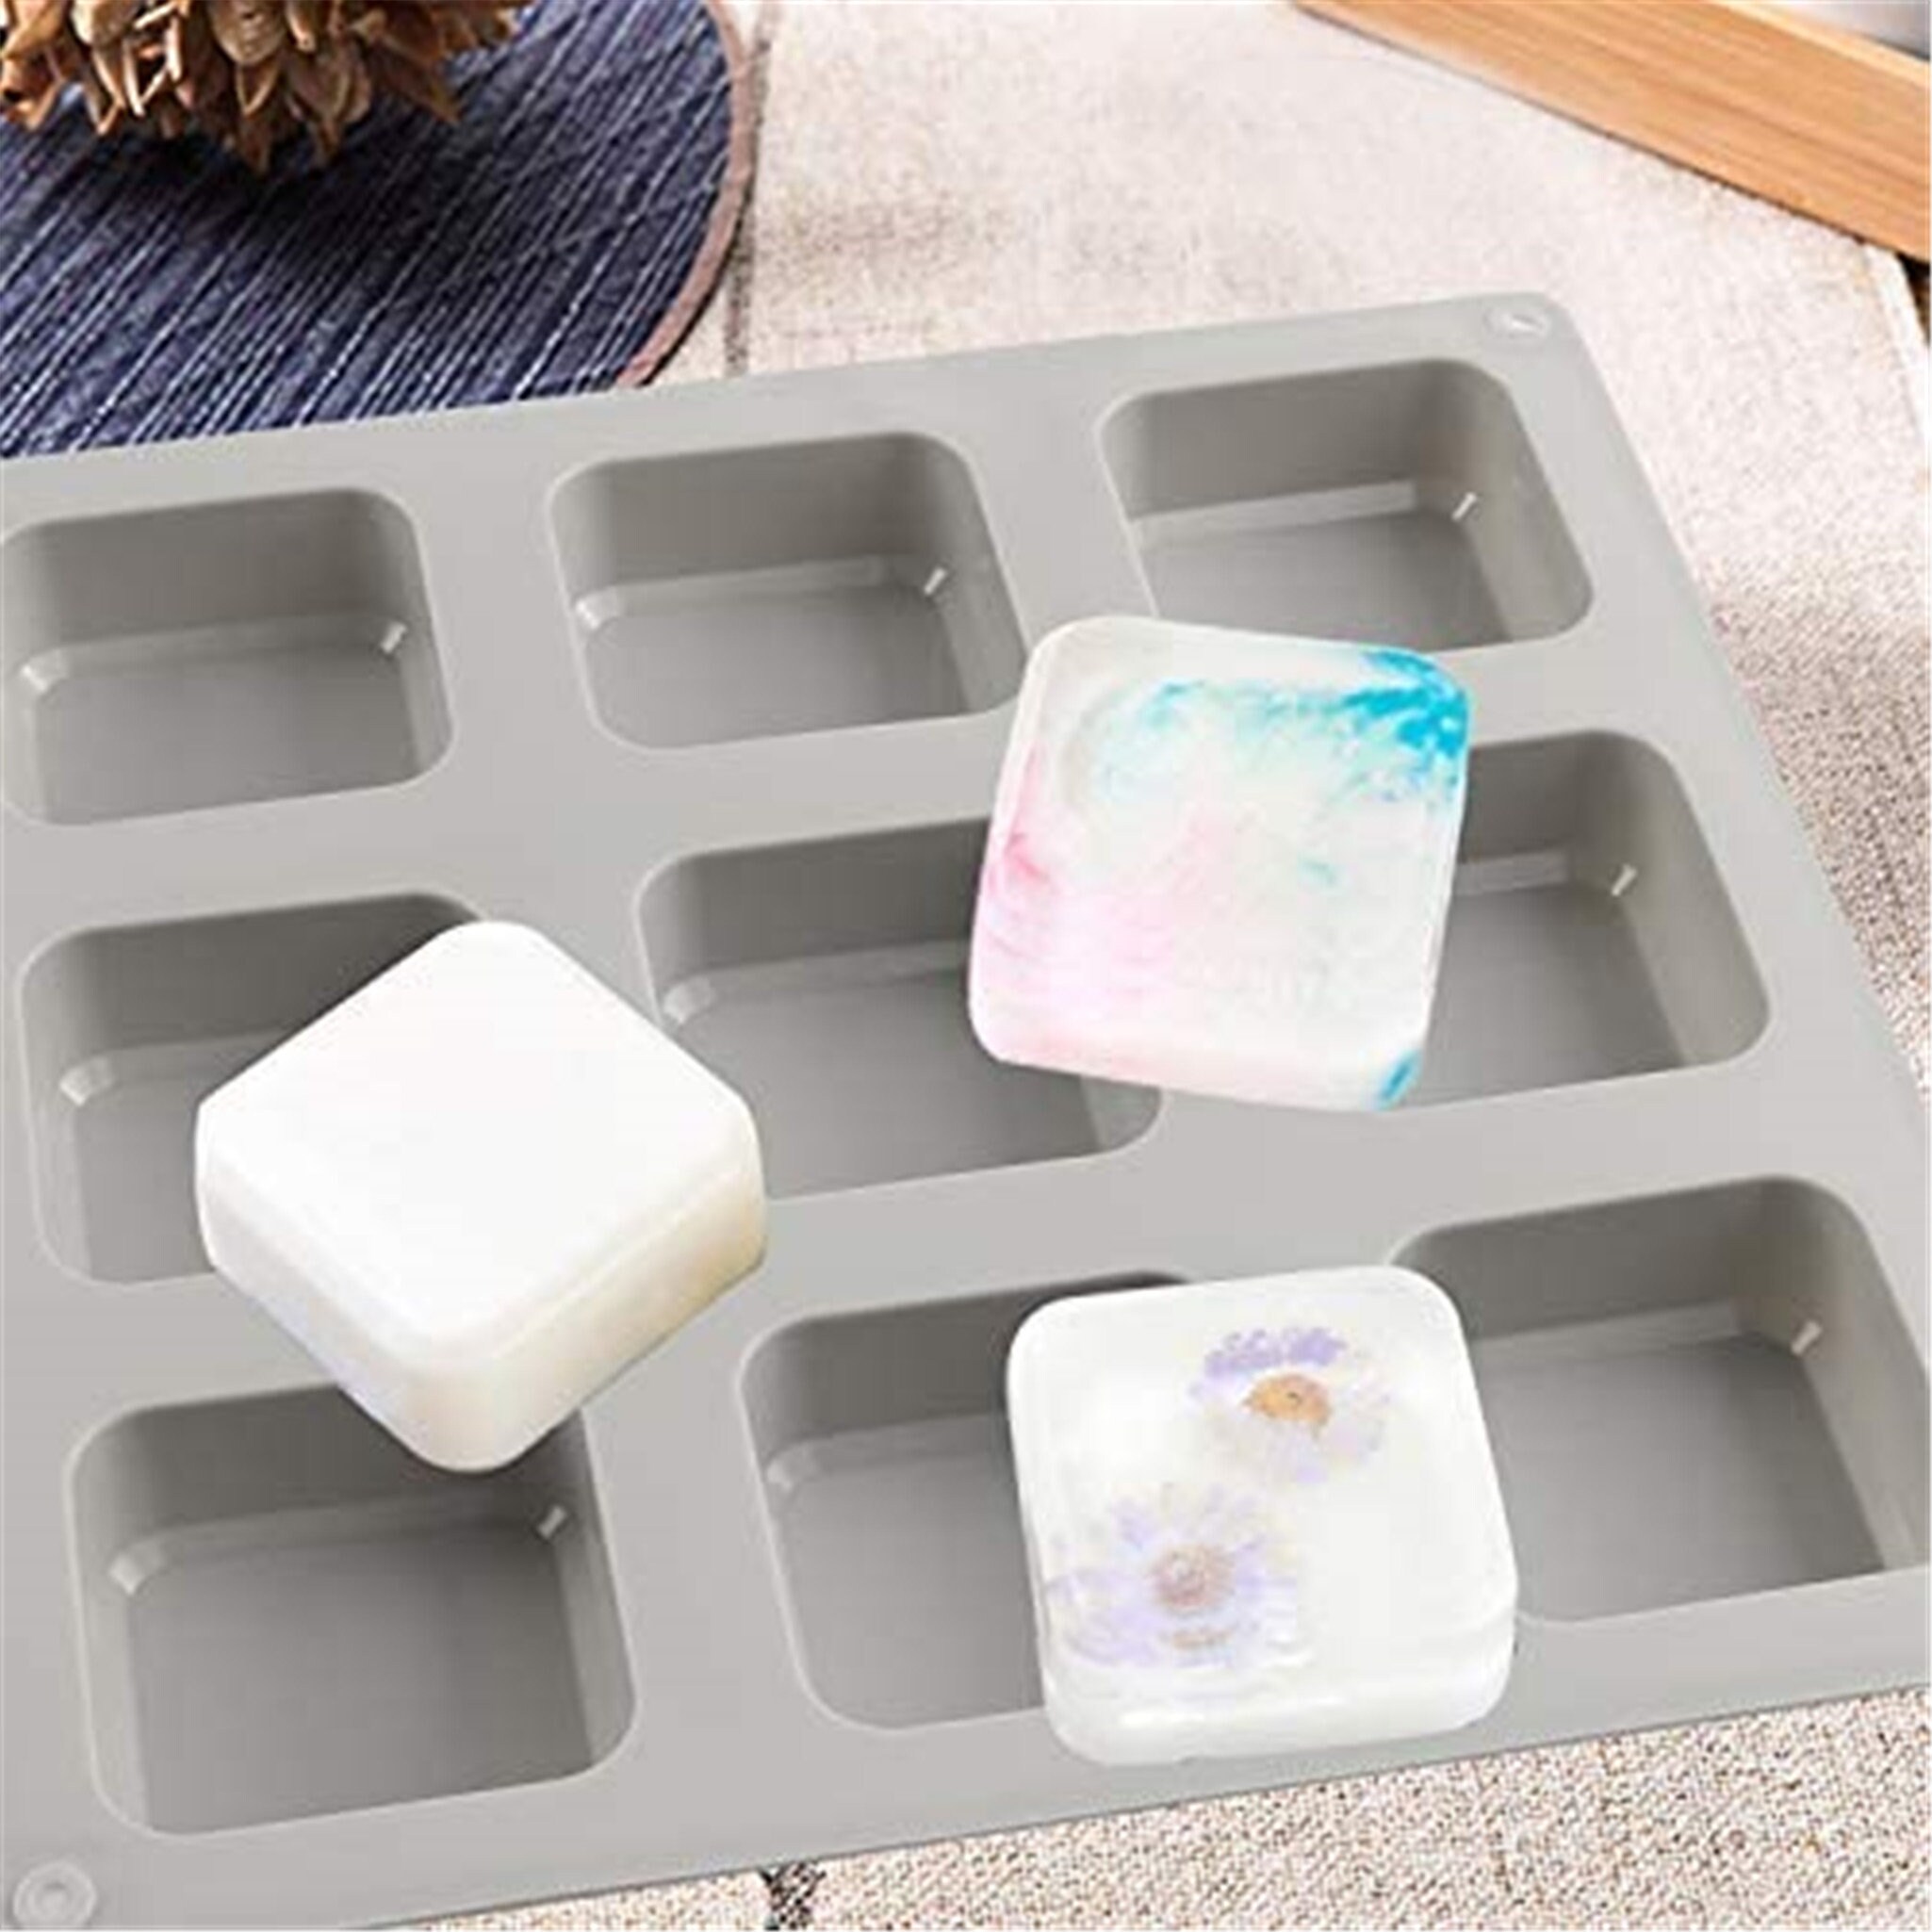 9 Cavity Soap Molds Silicone Mold for Making Handmade Soap